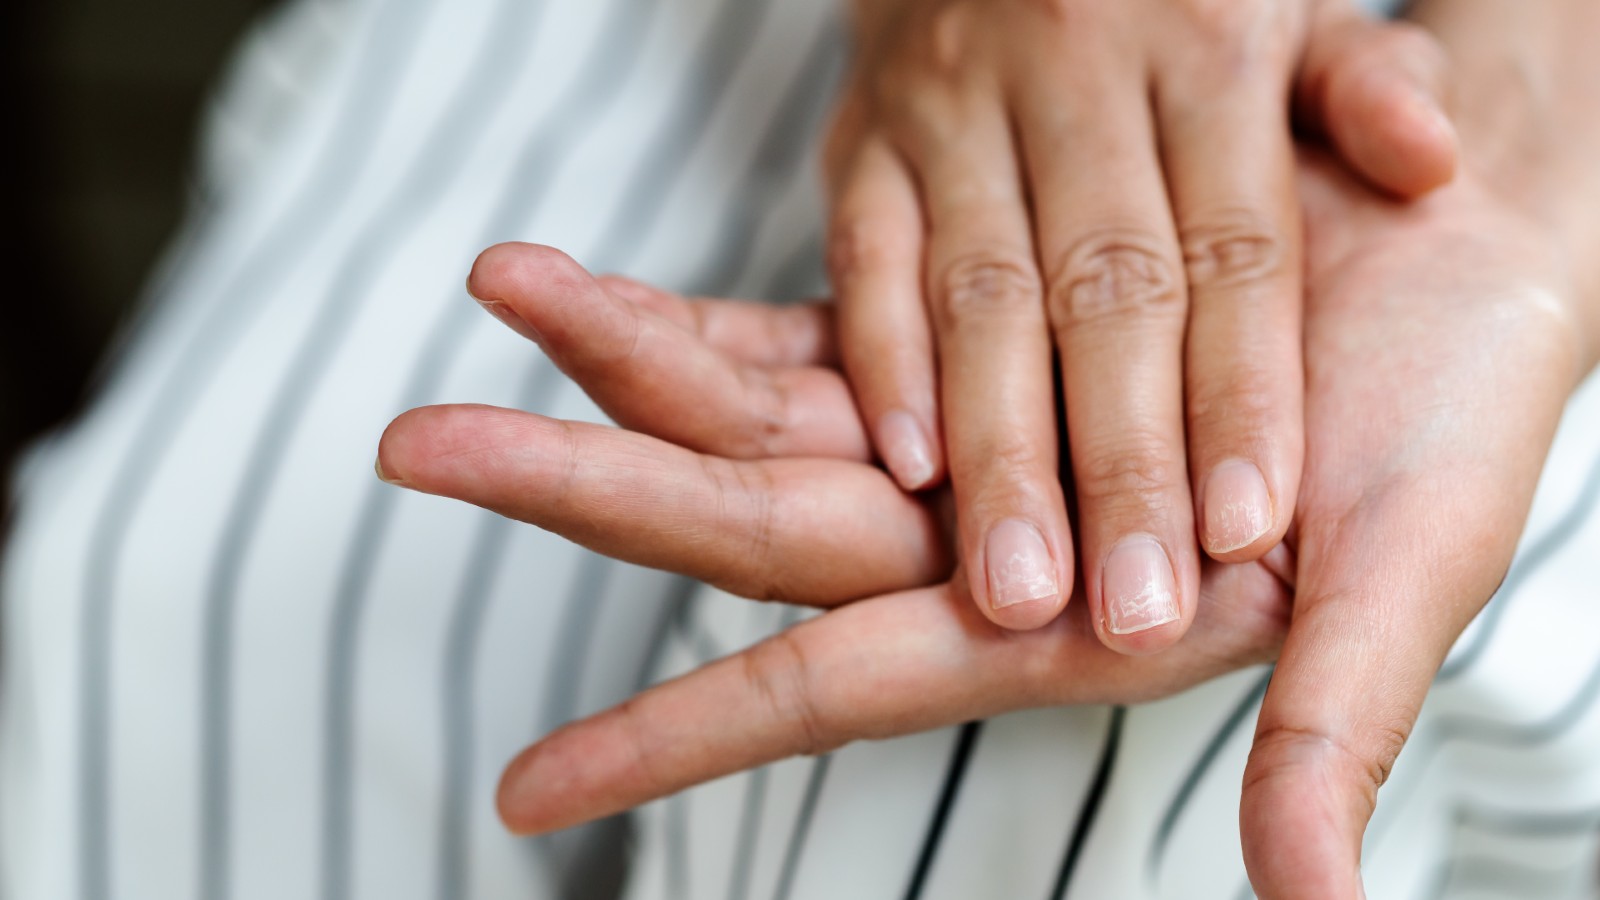 What Do Your Nails Look Like With Kidney Disease? | MyKidneyDiseaseCenter